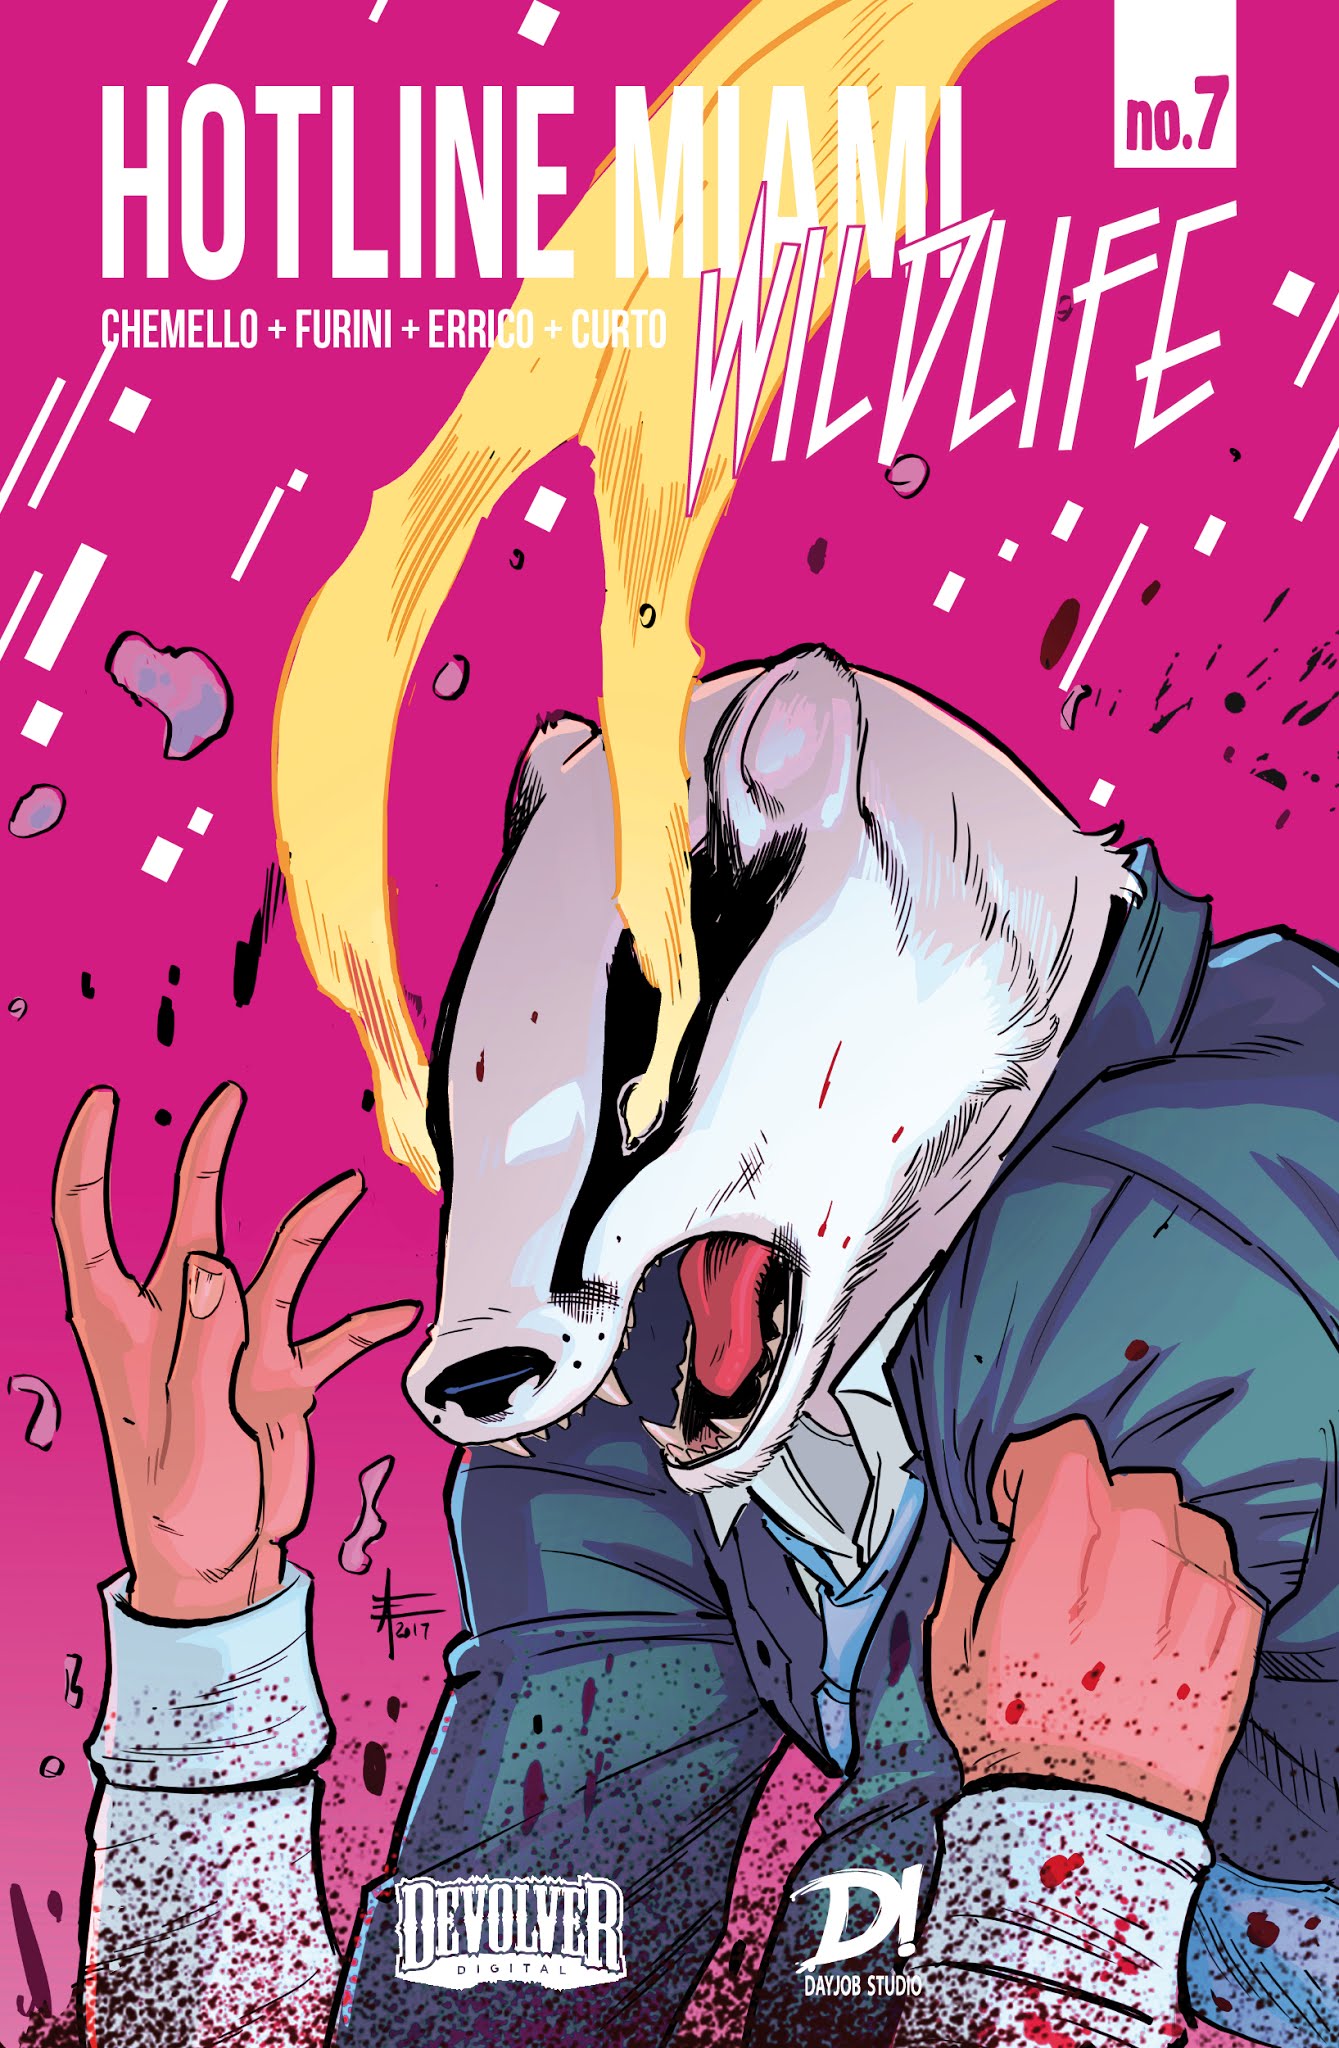 Hotline Miami Wildlife Issue 7 | Read Hotline Miami Wildlife Issue 7 comic  online in high quality. Read Full Comic online for free - Read comics  online in high quality .| READ COMIC ONLINE